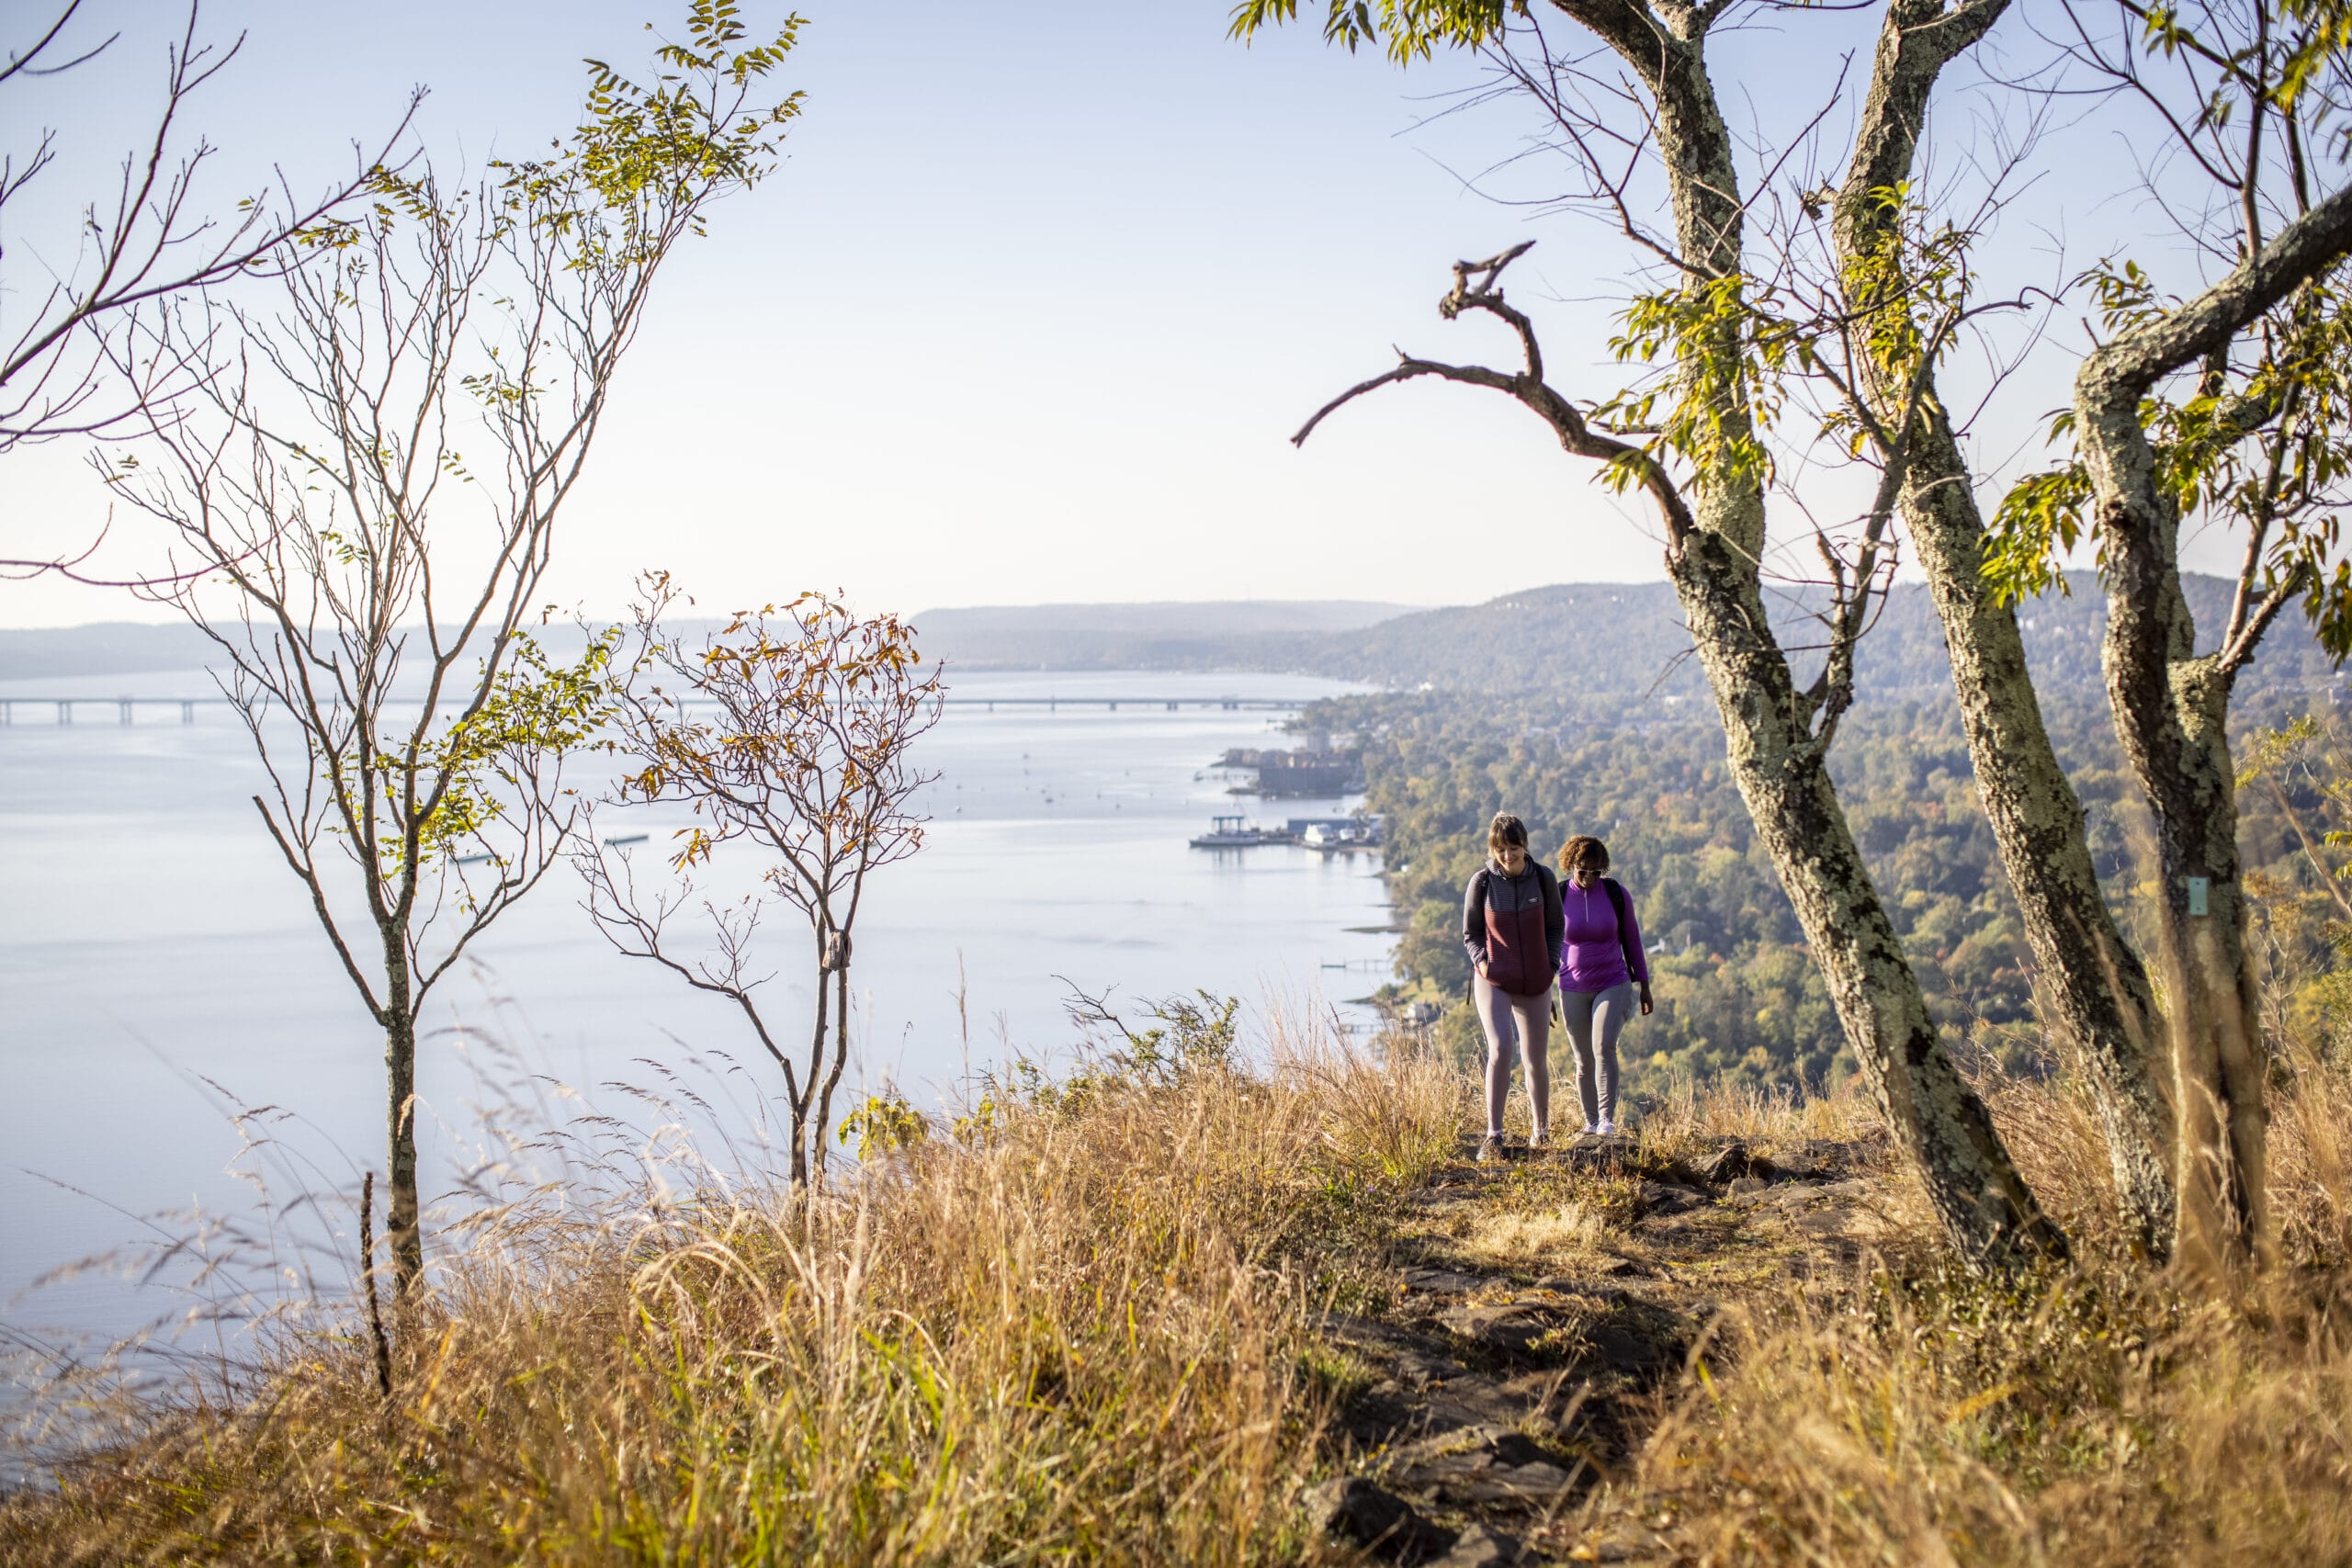 Two people standing on top of a hill overlooking a body of water.